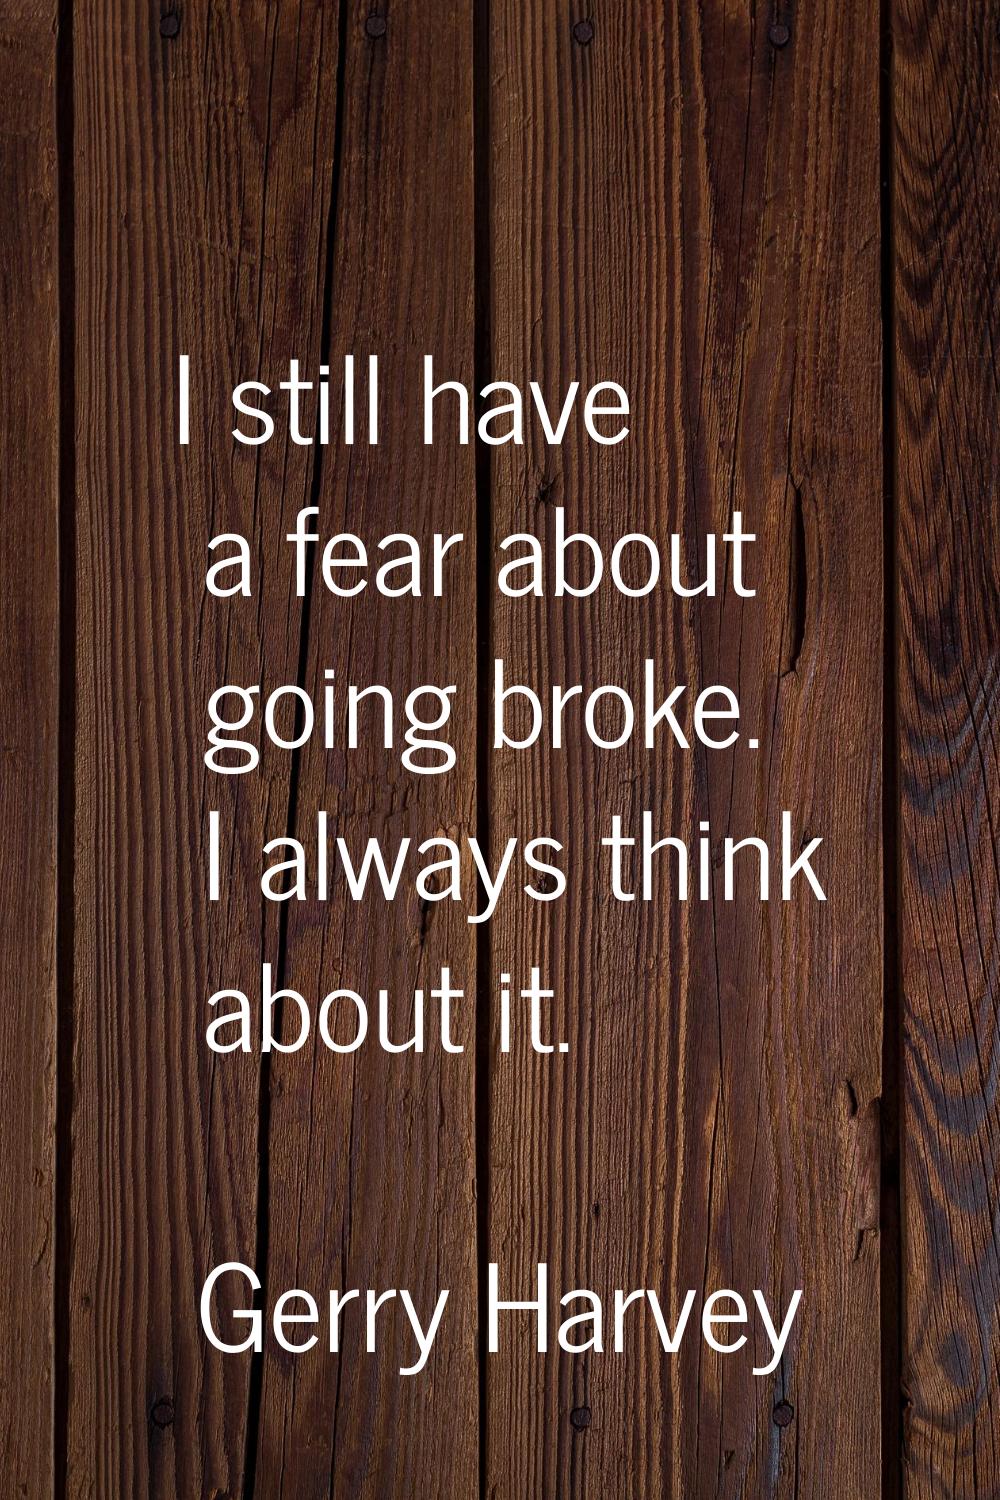 I still have a fear about going broke. I always think about it.